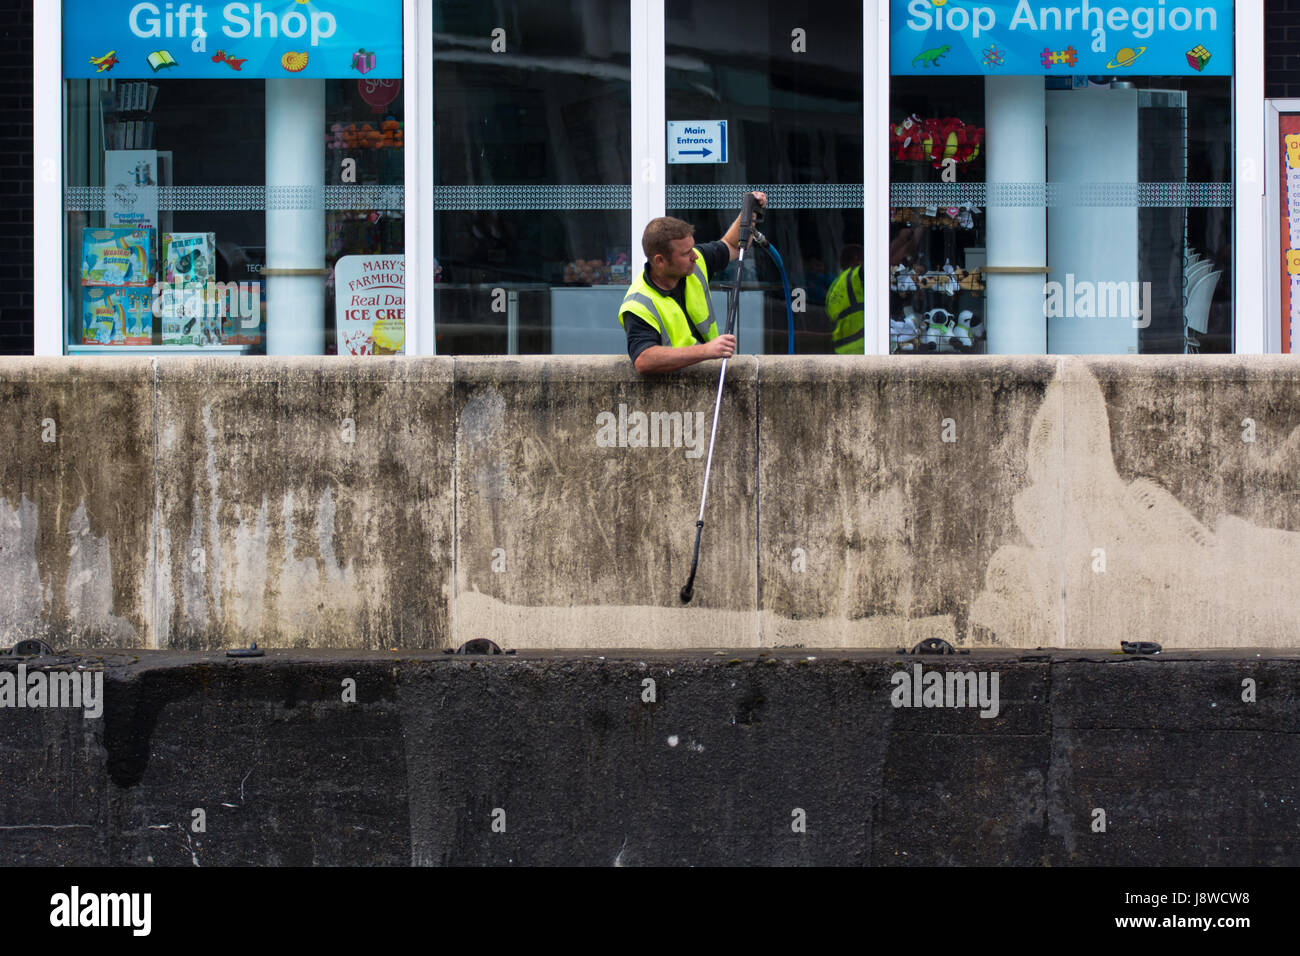 CARDIFF, UK - MAY 29 2017 Workman using pressure jet to clean wall. Man uses pressure washer to remove dirt from concrete surrounding Mermaid Key Stock Photo